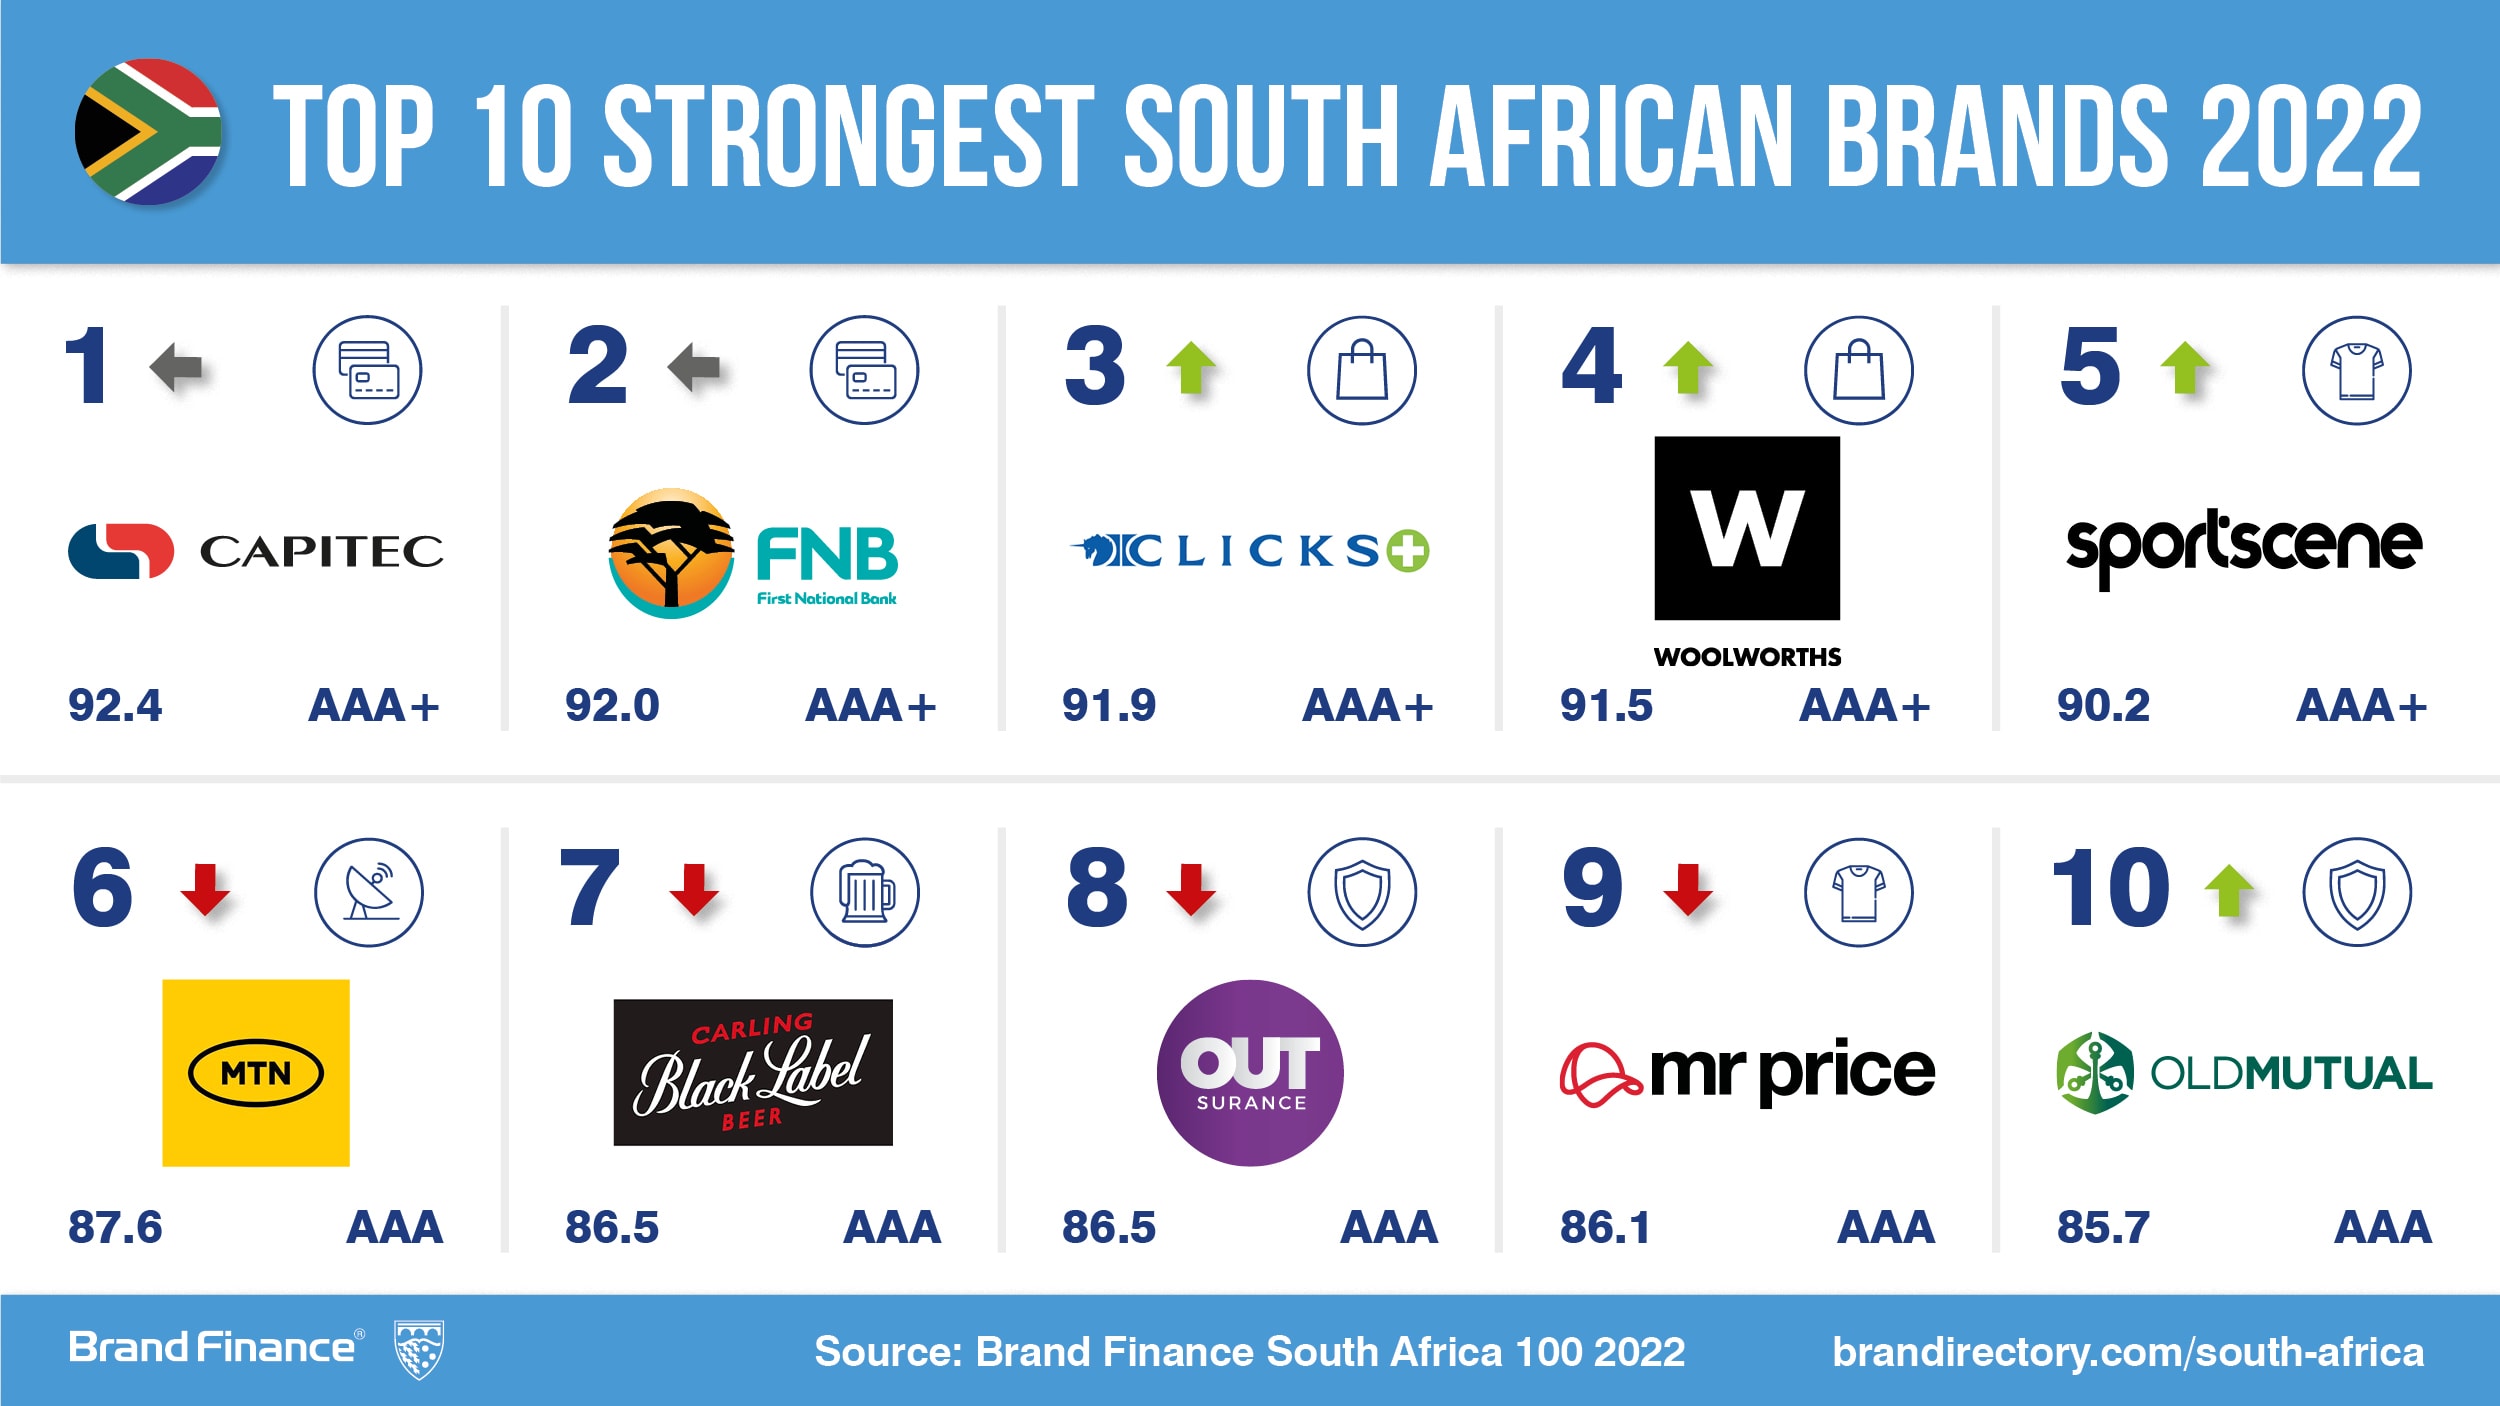 South African brands power economy as MTN bounces back from COVID19 to